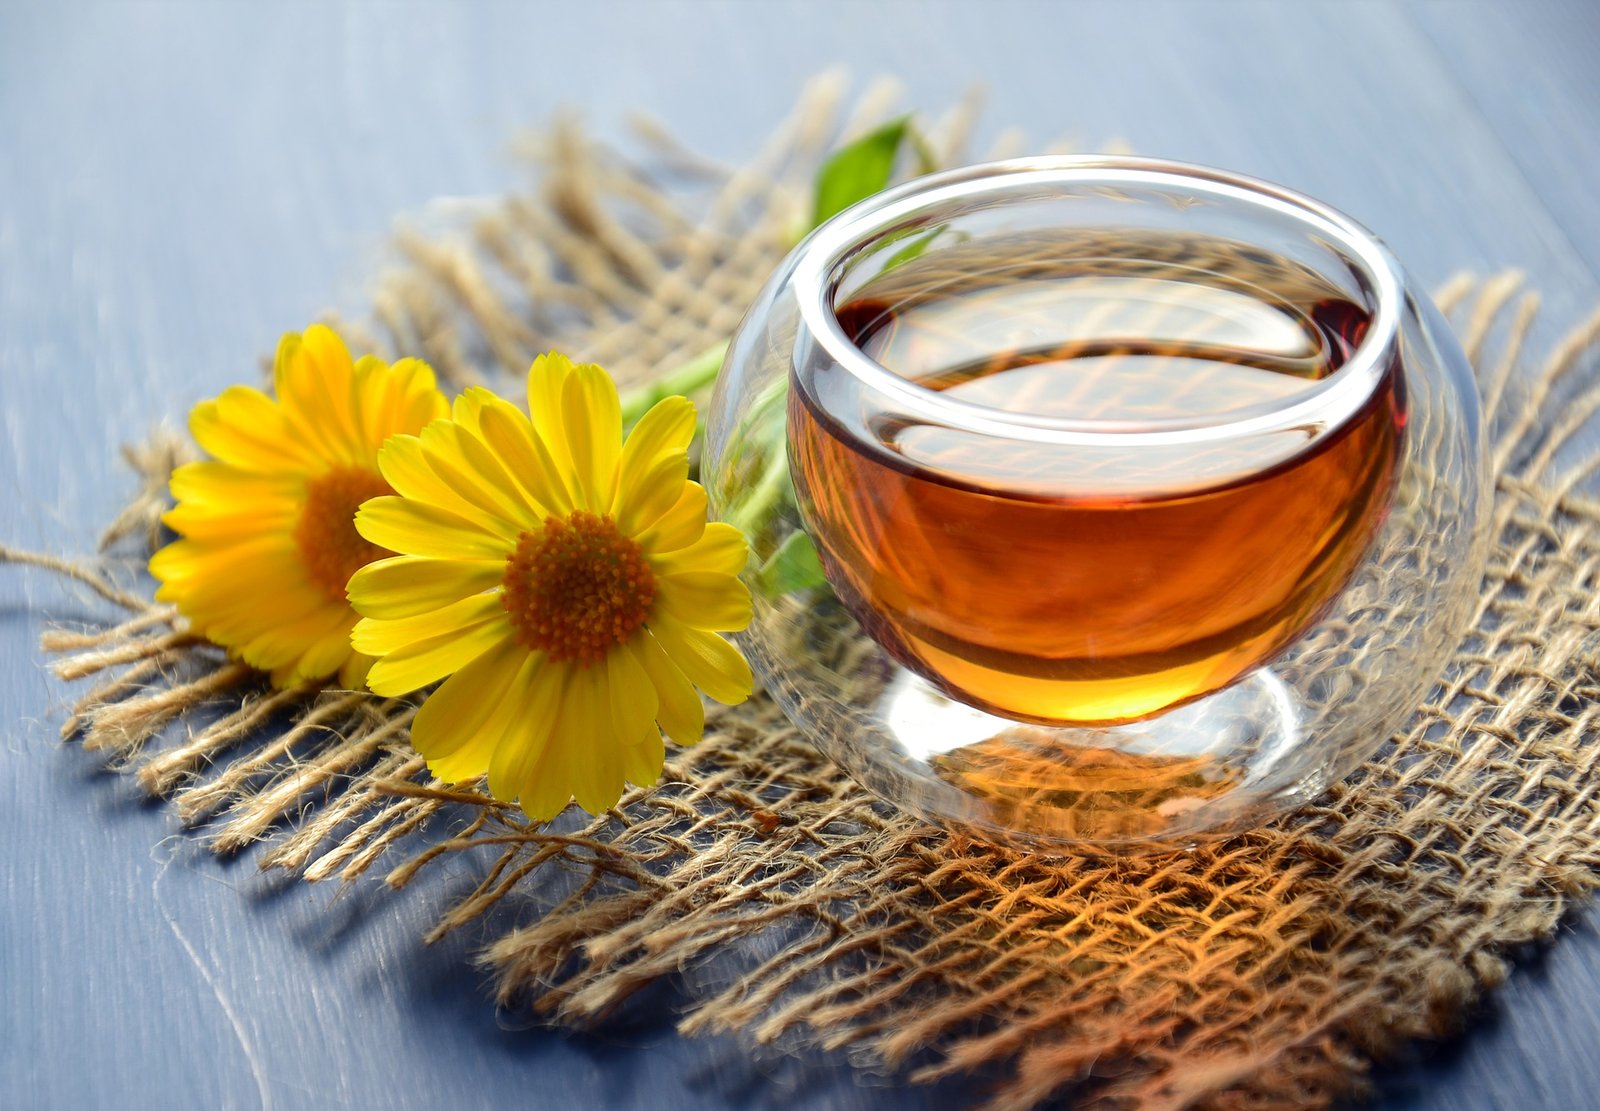 10 Simple Herbal Remedies From Your Garden - Calendula